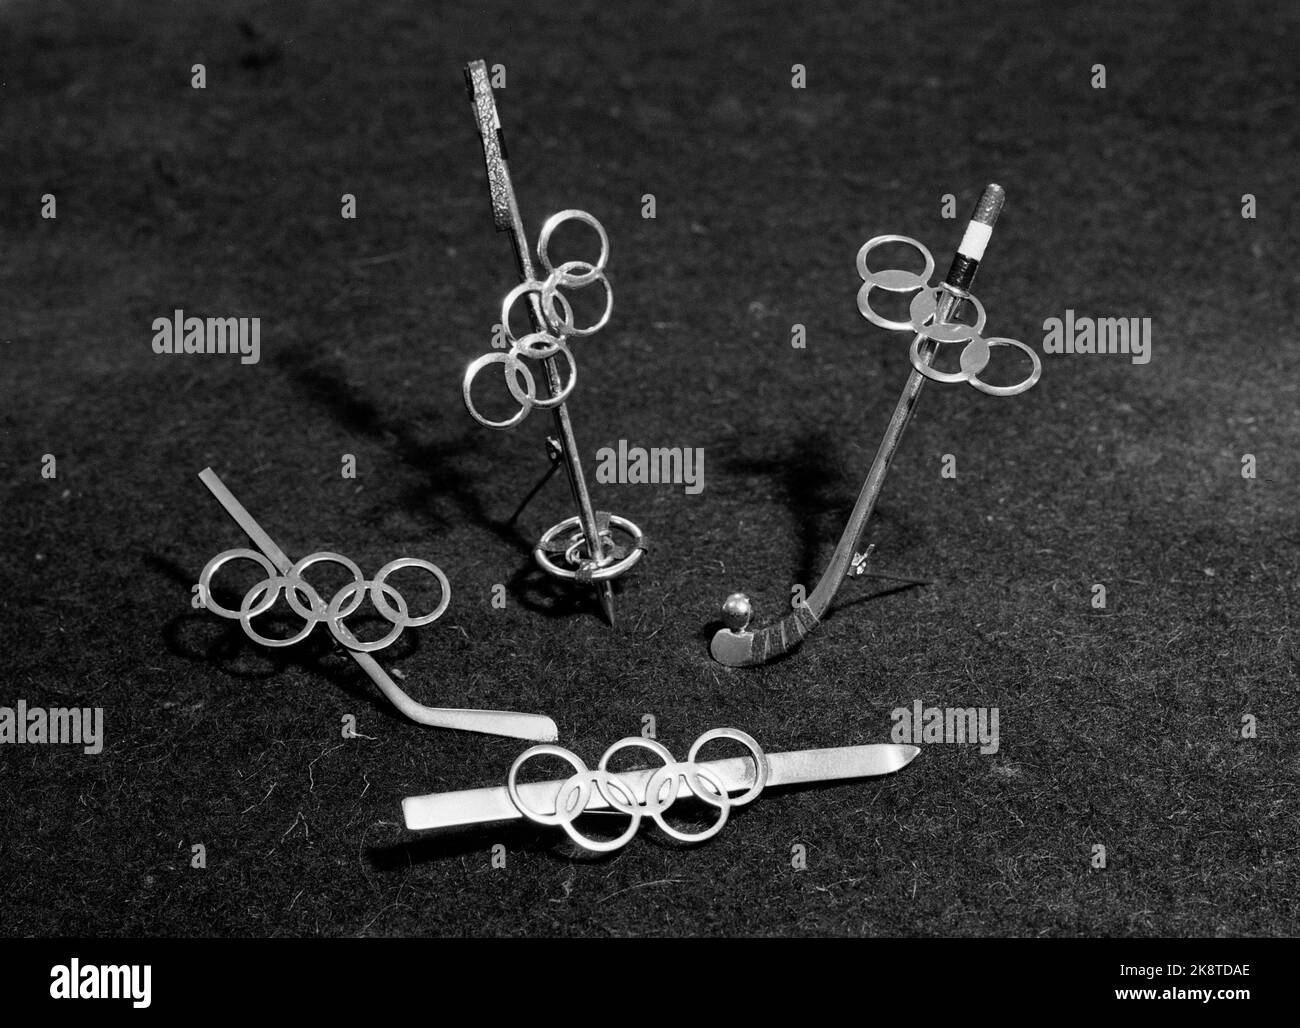 Oslo December 1951. Souvenirs in all shapes were produced for the Olympic Winter Games in Oslo 1952. All manufacturers who wanted to produce souvenirs had to obtain permission from a committee subject to the organizational committee for the games, to ensure that the products kept goals. Here pins / jackets with the Olympic rings, and symbols for various sports. Photo: Current / NTB Stock Photo